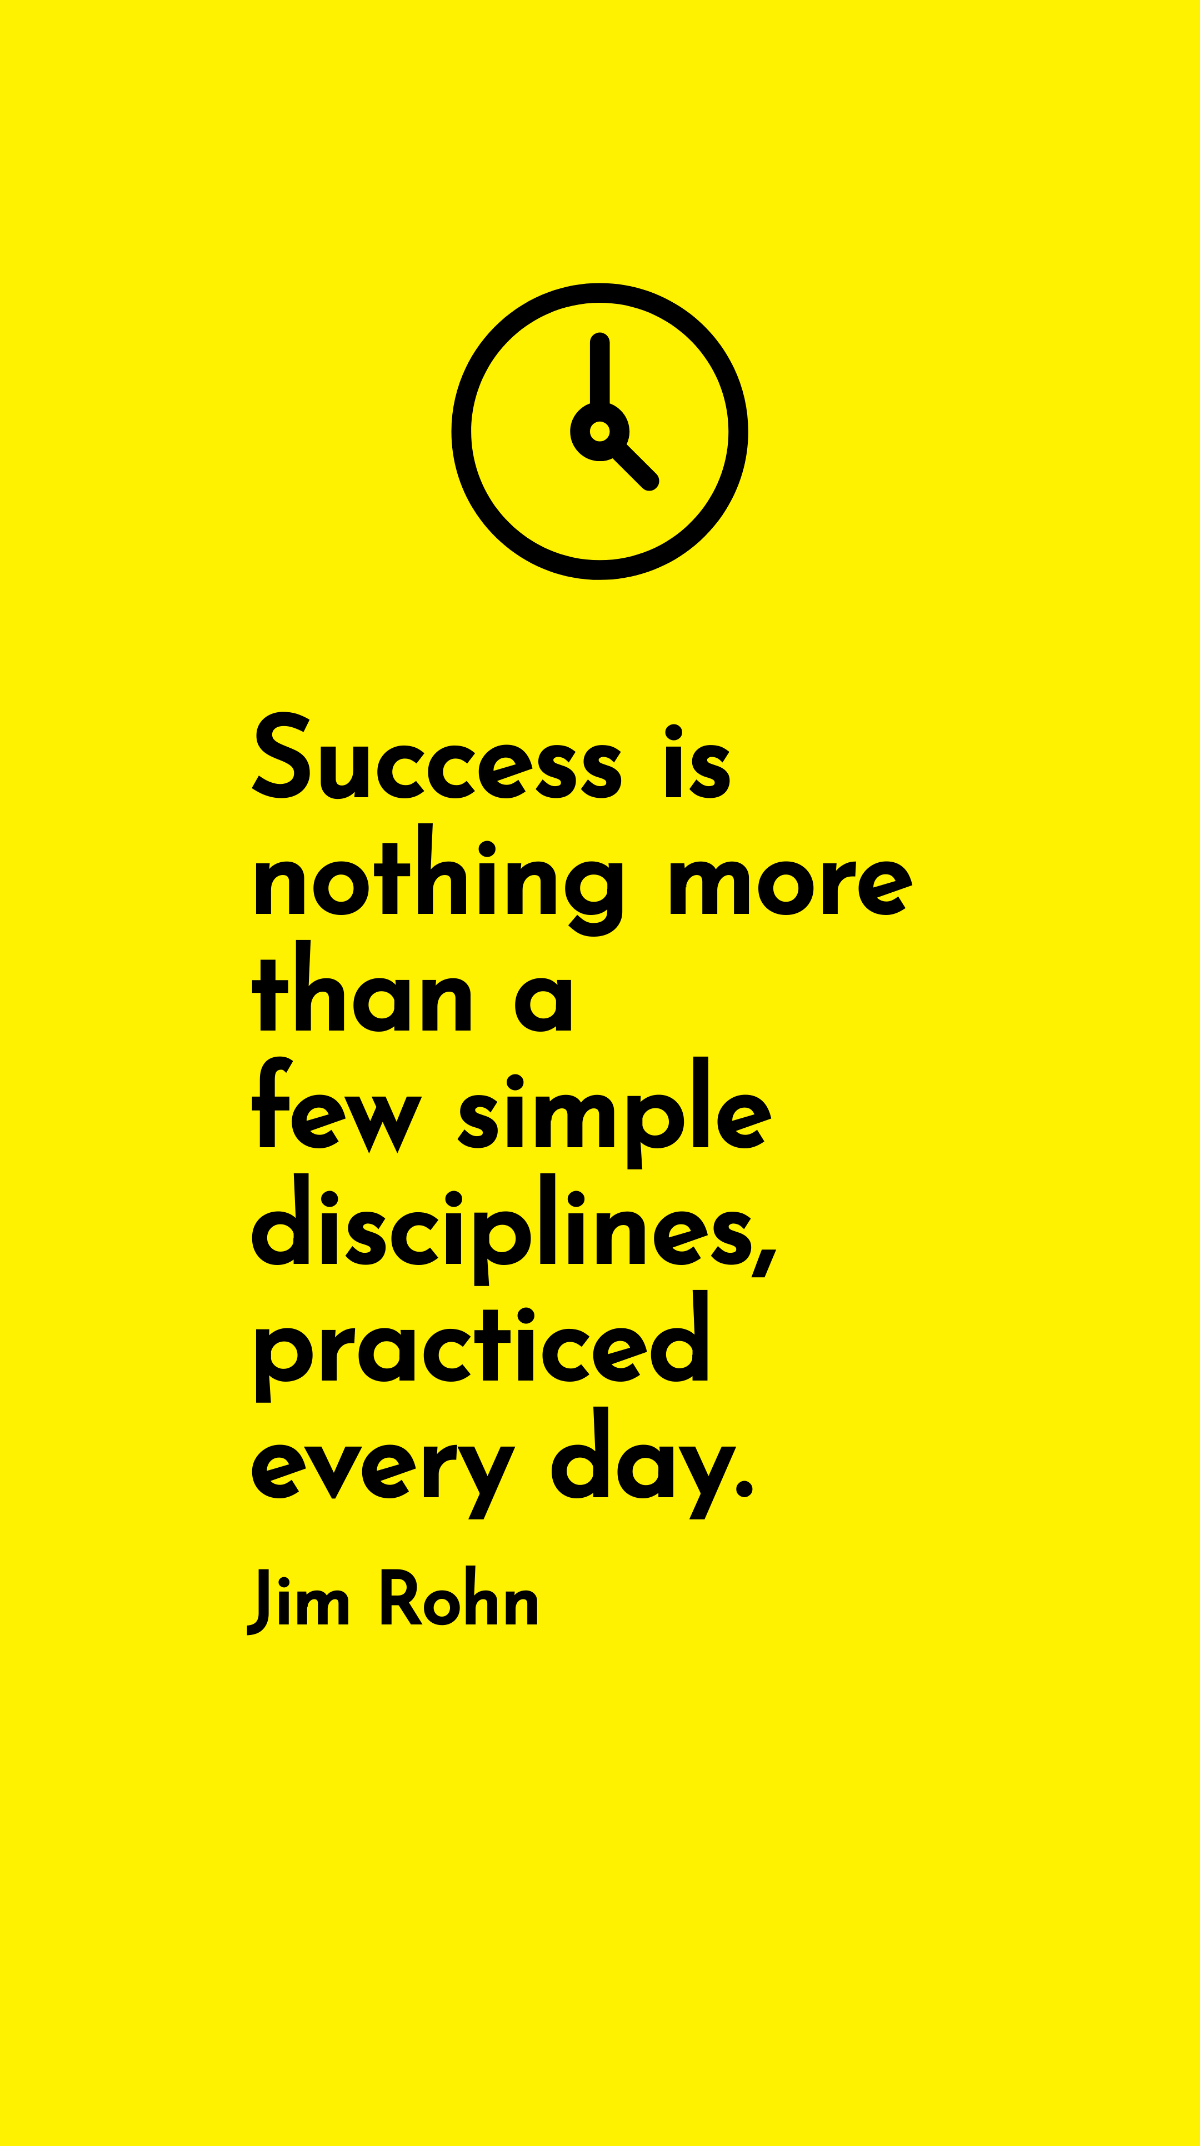 Jim Rohn - Success is nothing more than a few simple disciplines, practiced every day.